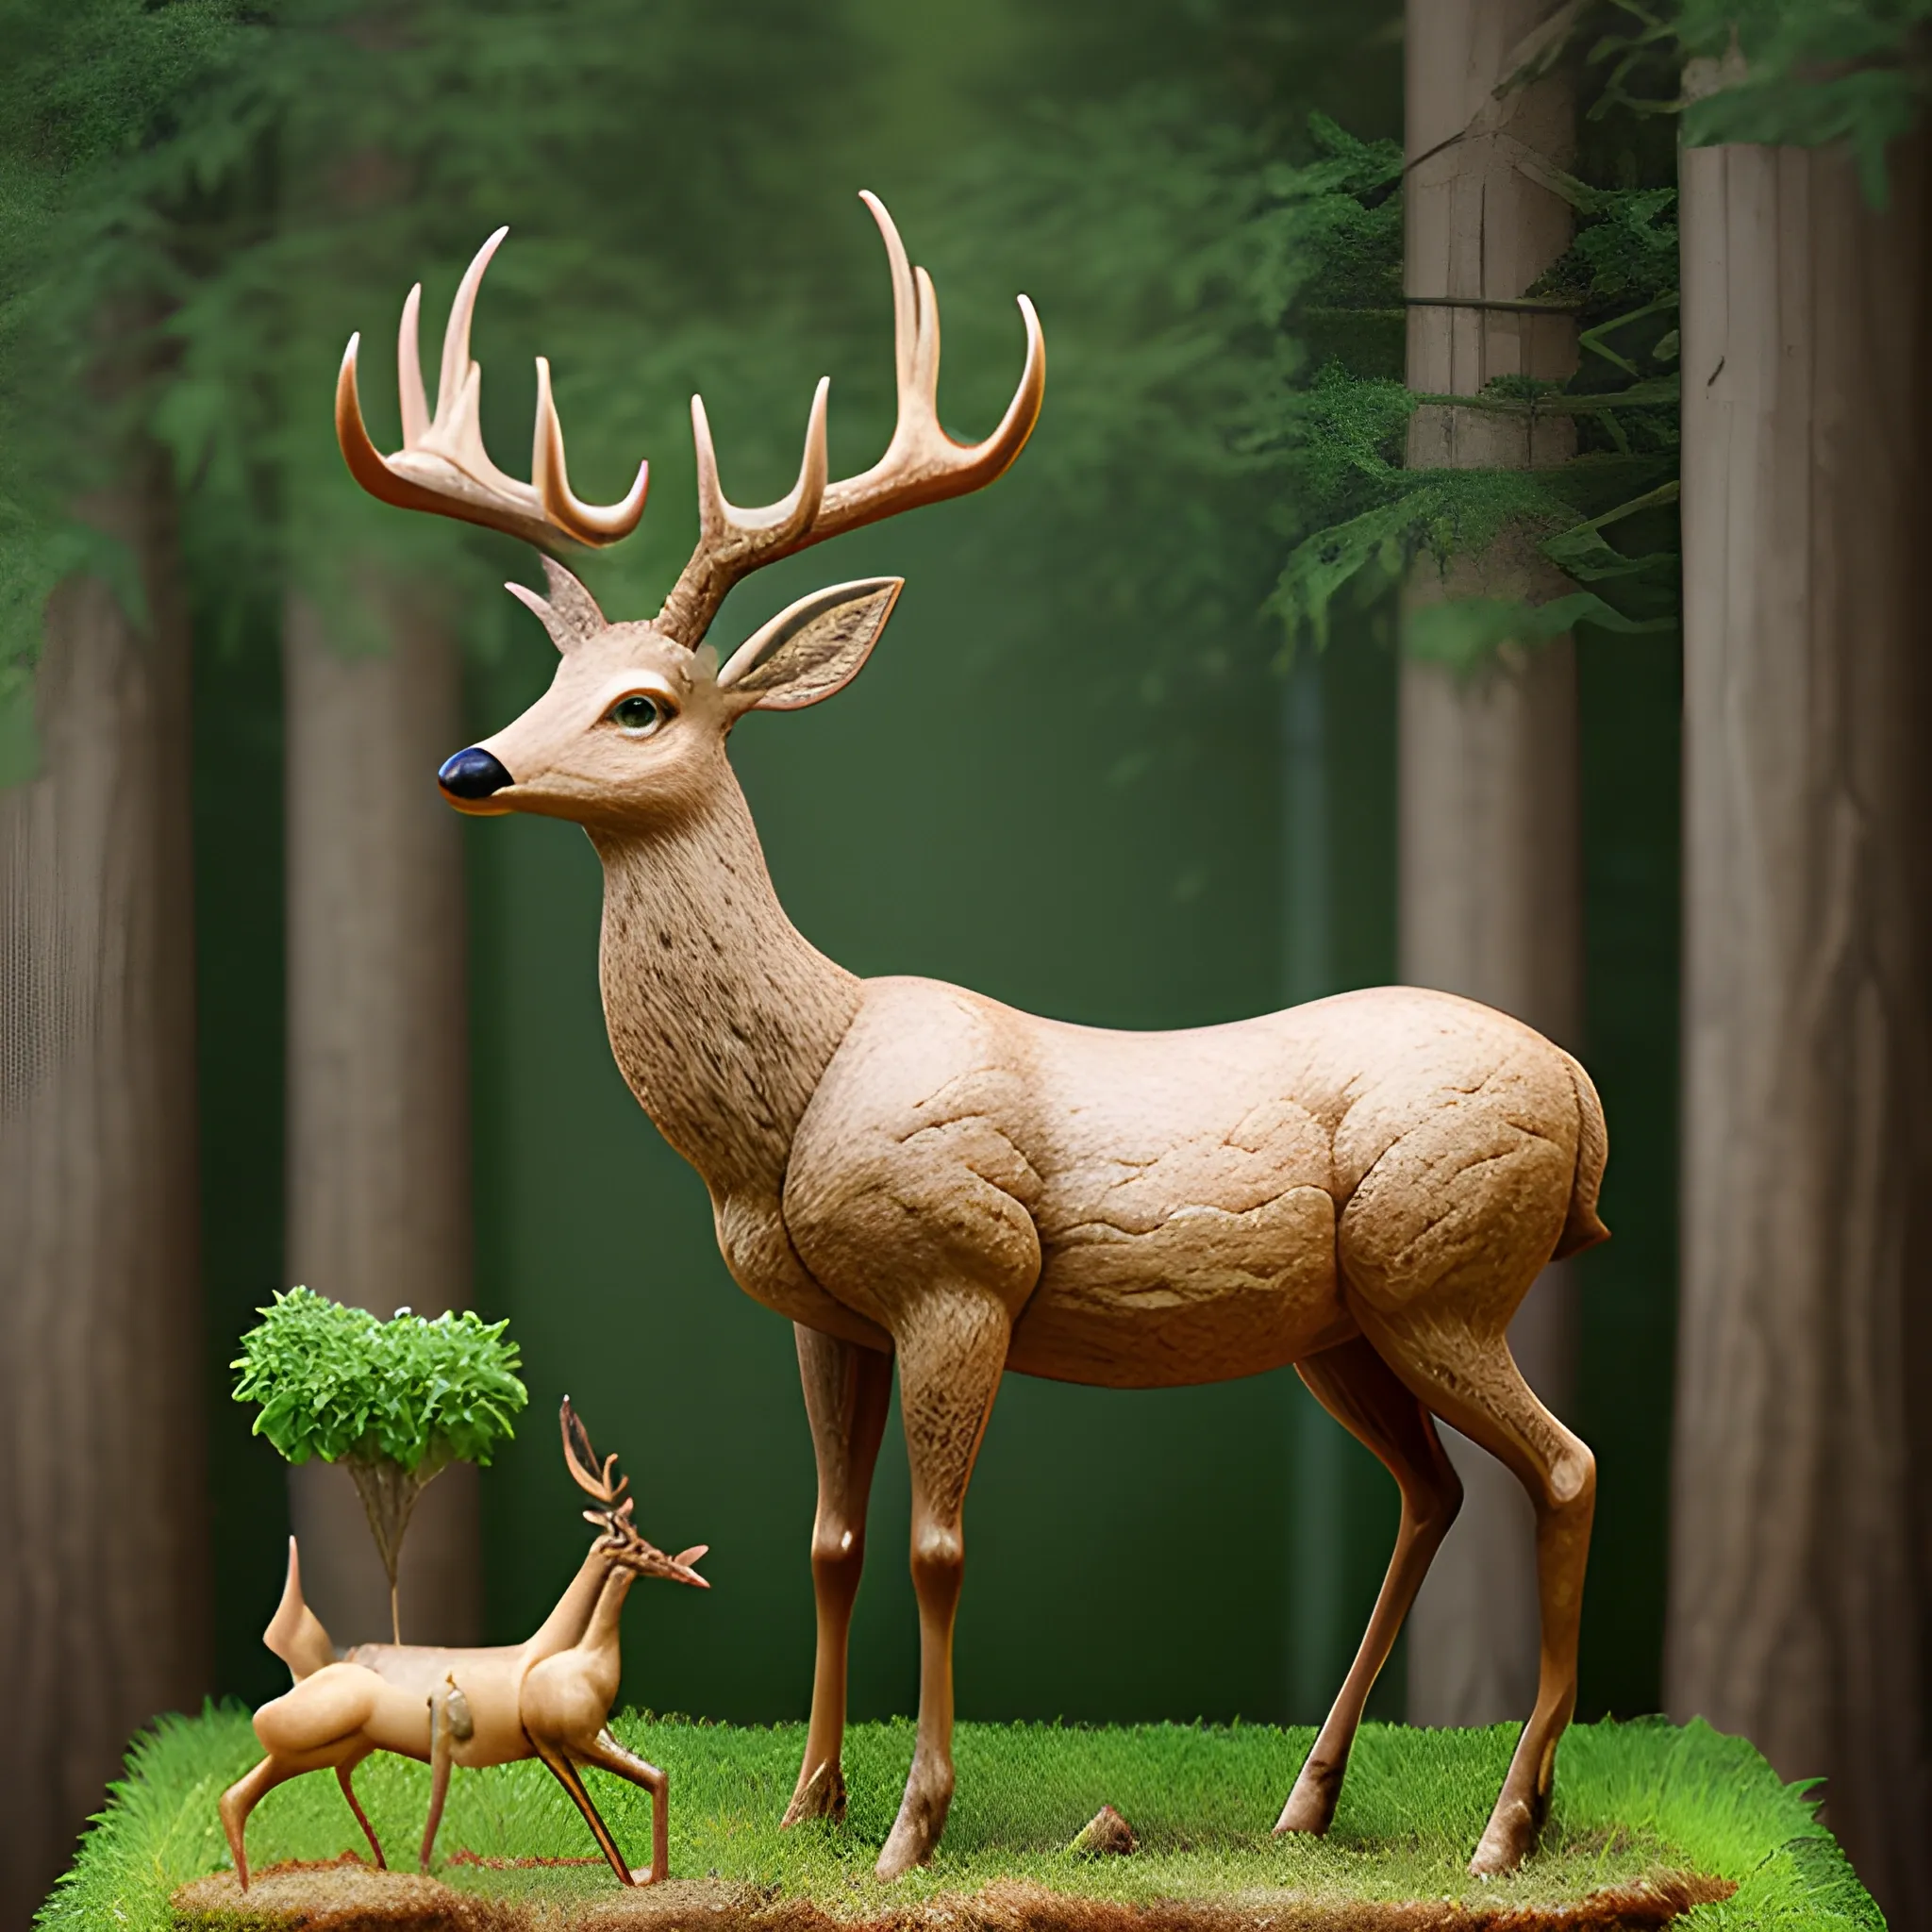 , Cartoon, Hyper realistic, stylized sculpture, goddess of deer and plants, mounted on an animal mix of deer and horse. made by a genius modern sculptor in the 21st century